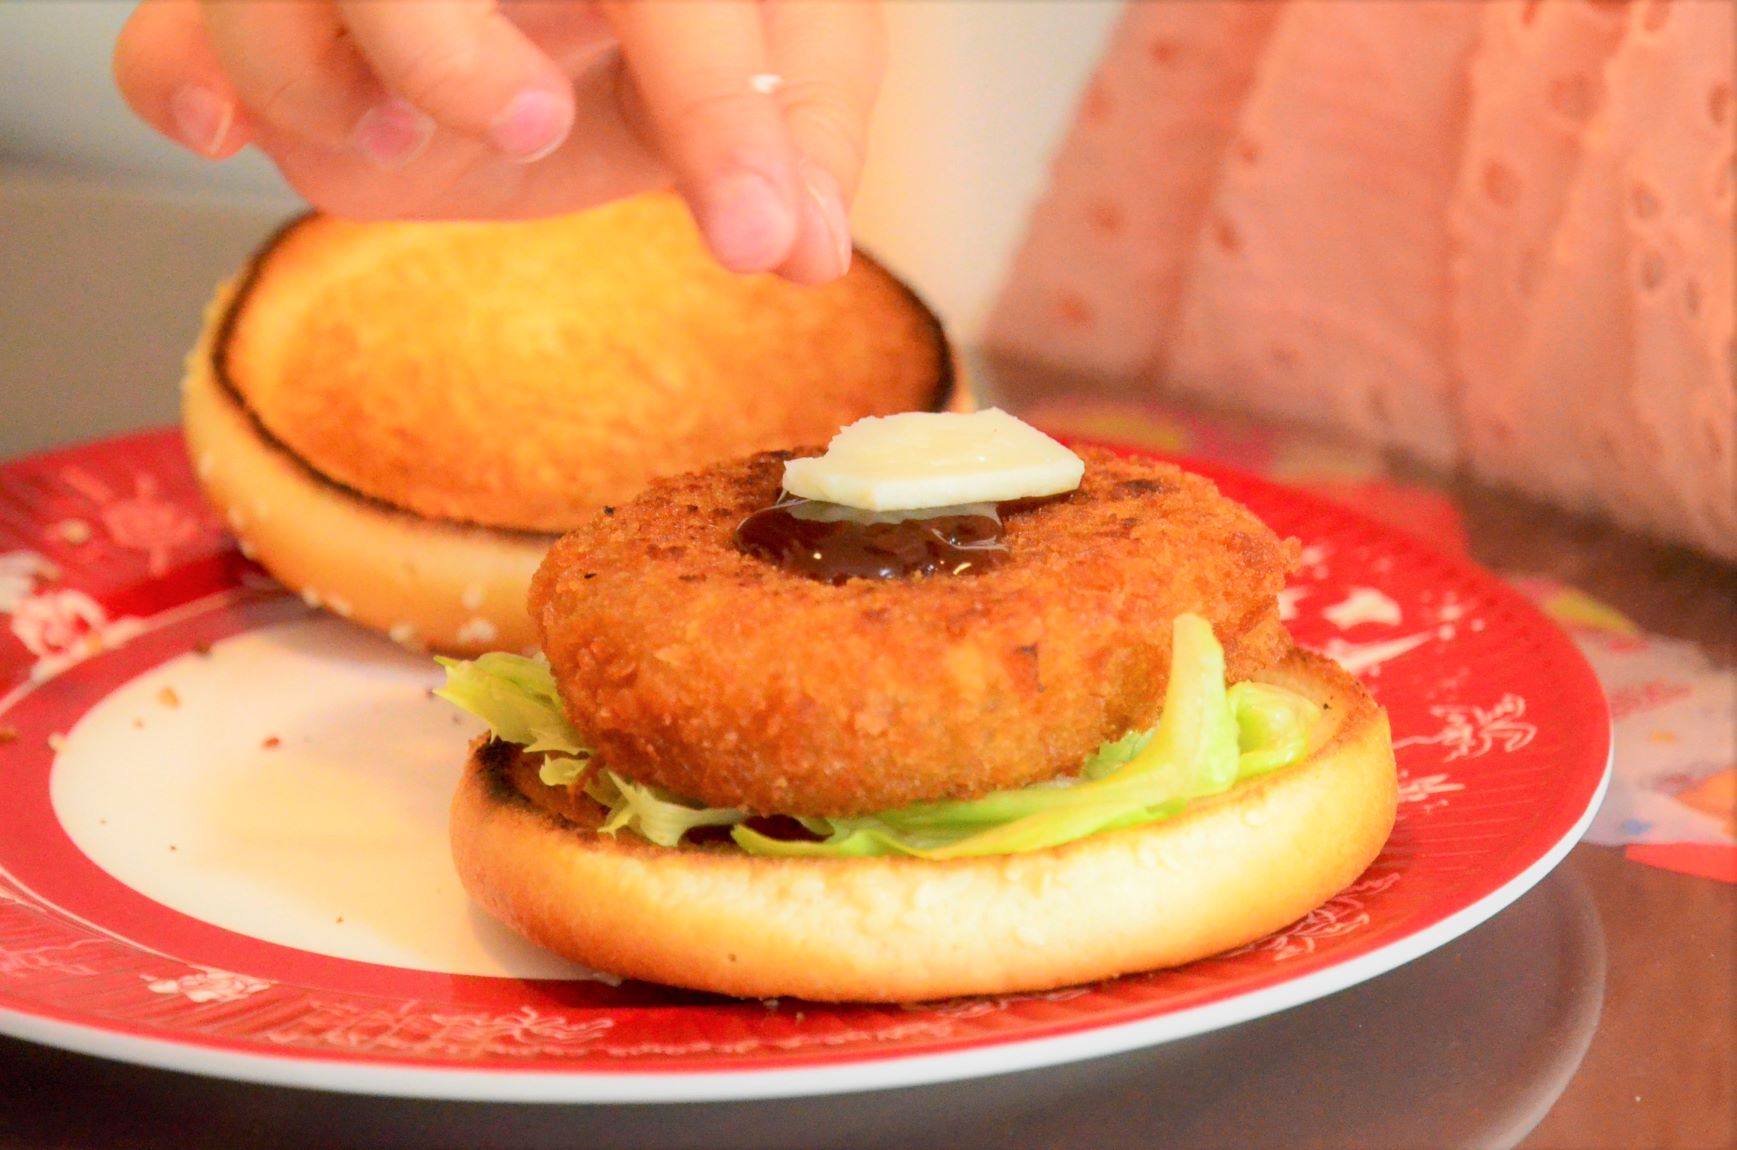 The croquette burger is topped with cheese